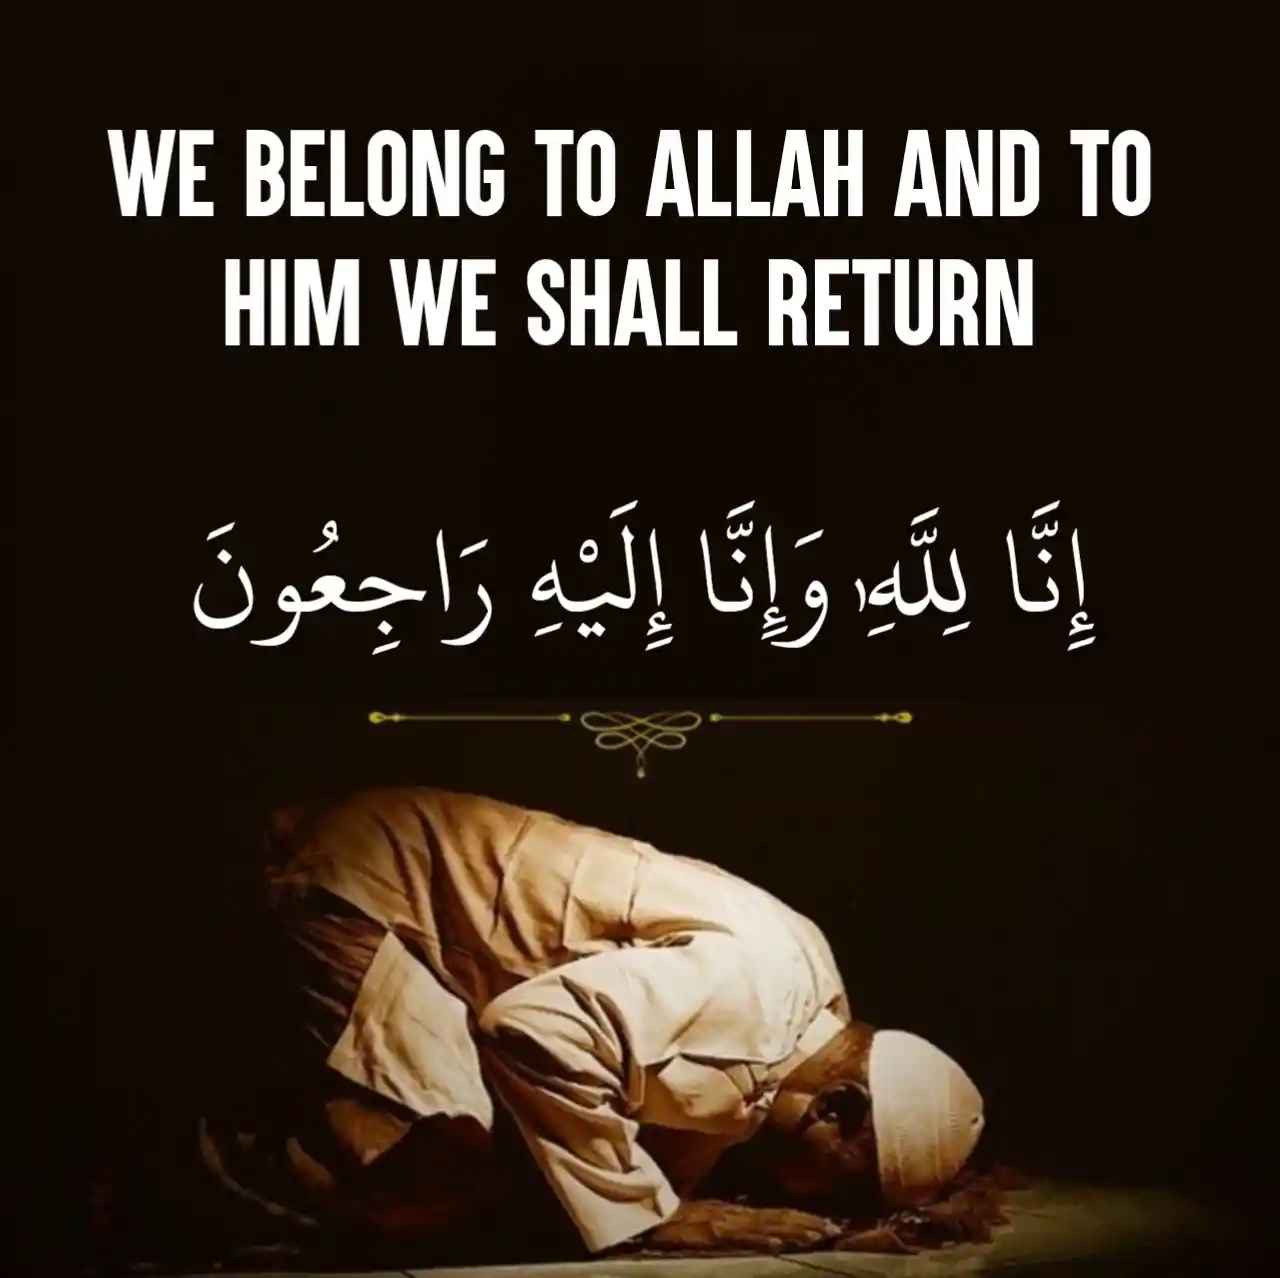 We Belong To Allah and to Him We Shall Return